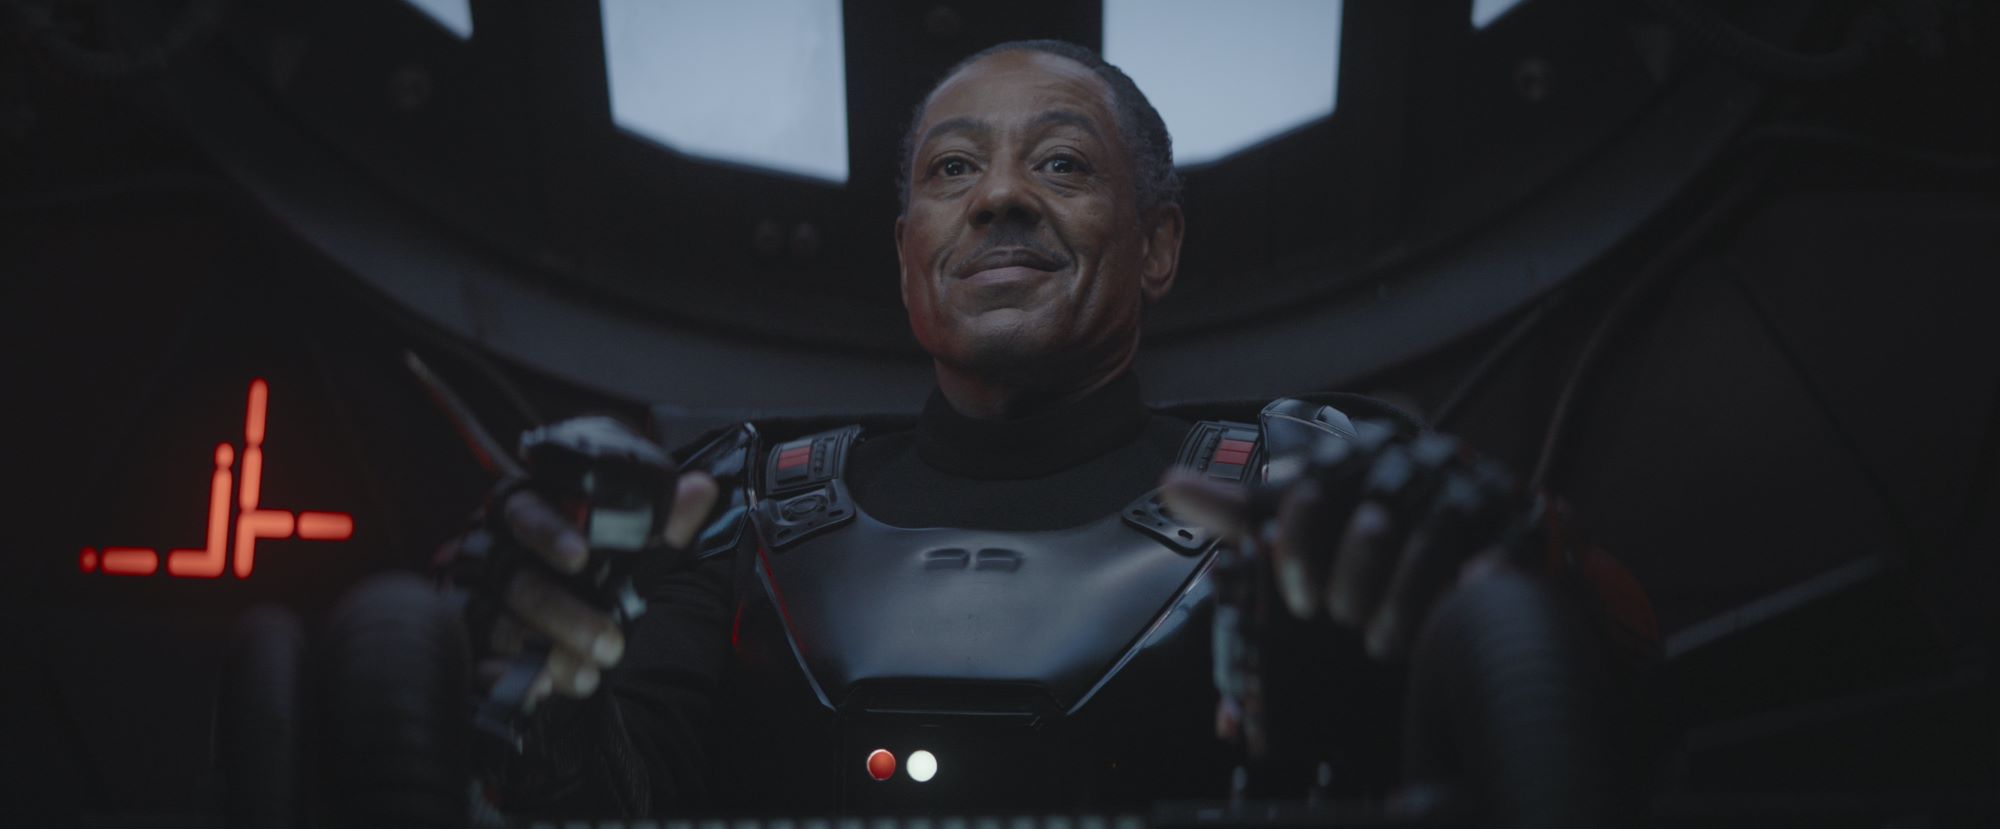 ‘The Mandalorian’ Star Giancarlo Esposito Reveals Fans Will See More of The Child’s Powers in Season 2